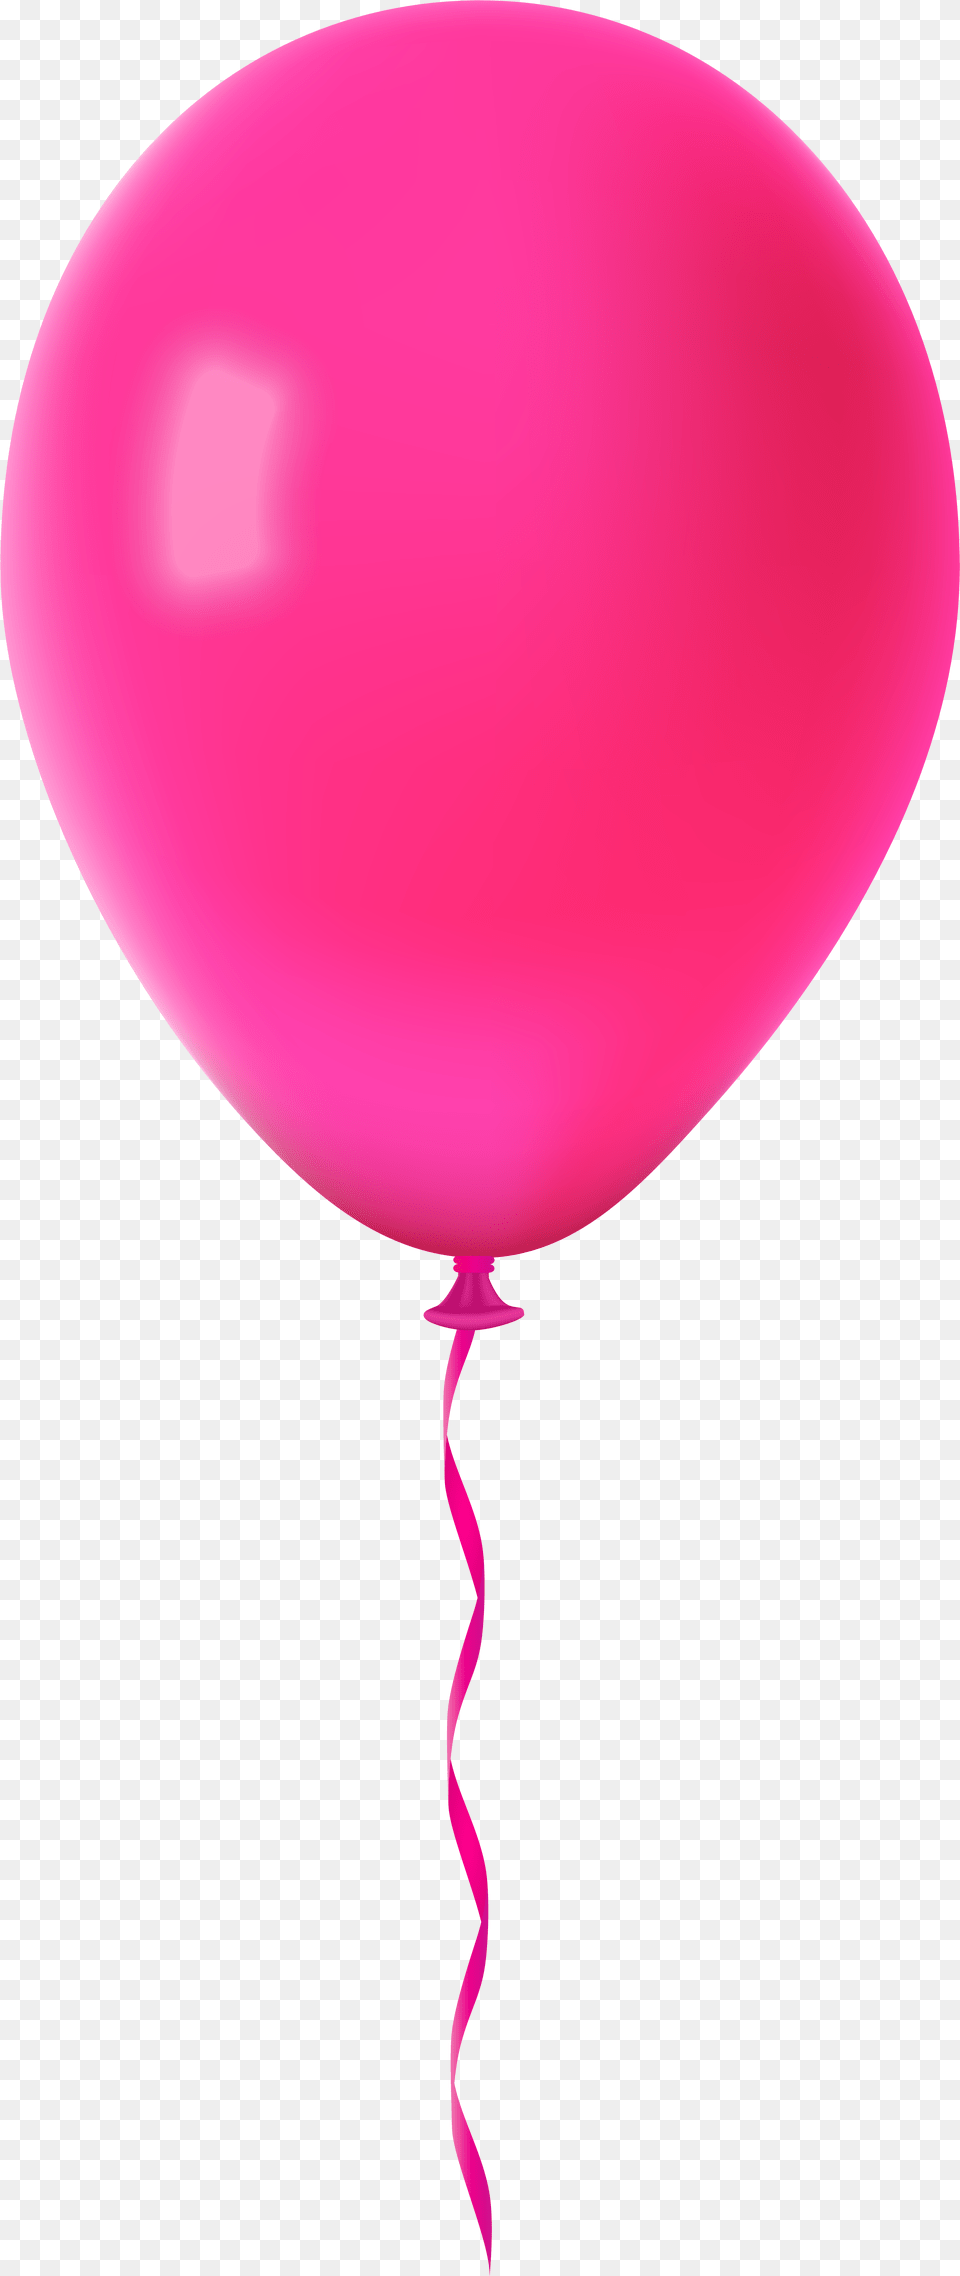 Pink Balloon Background Balloon Pink Background Free Png Download